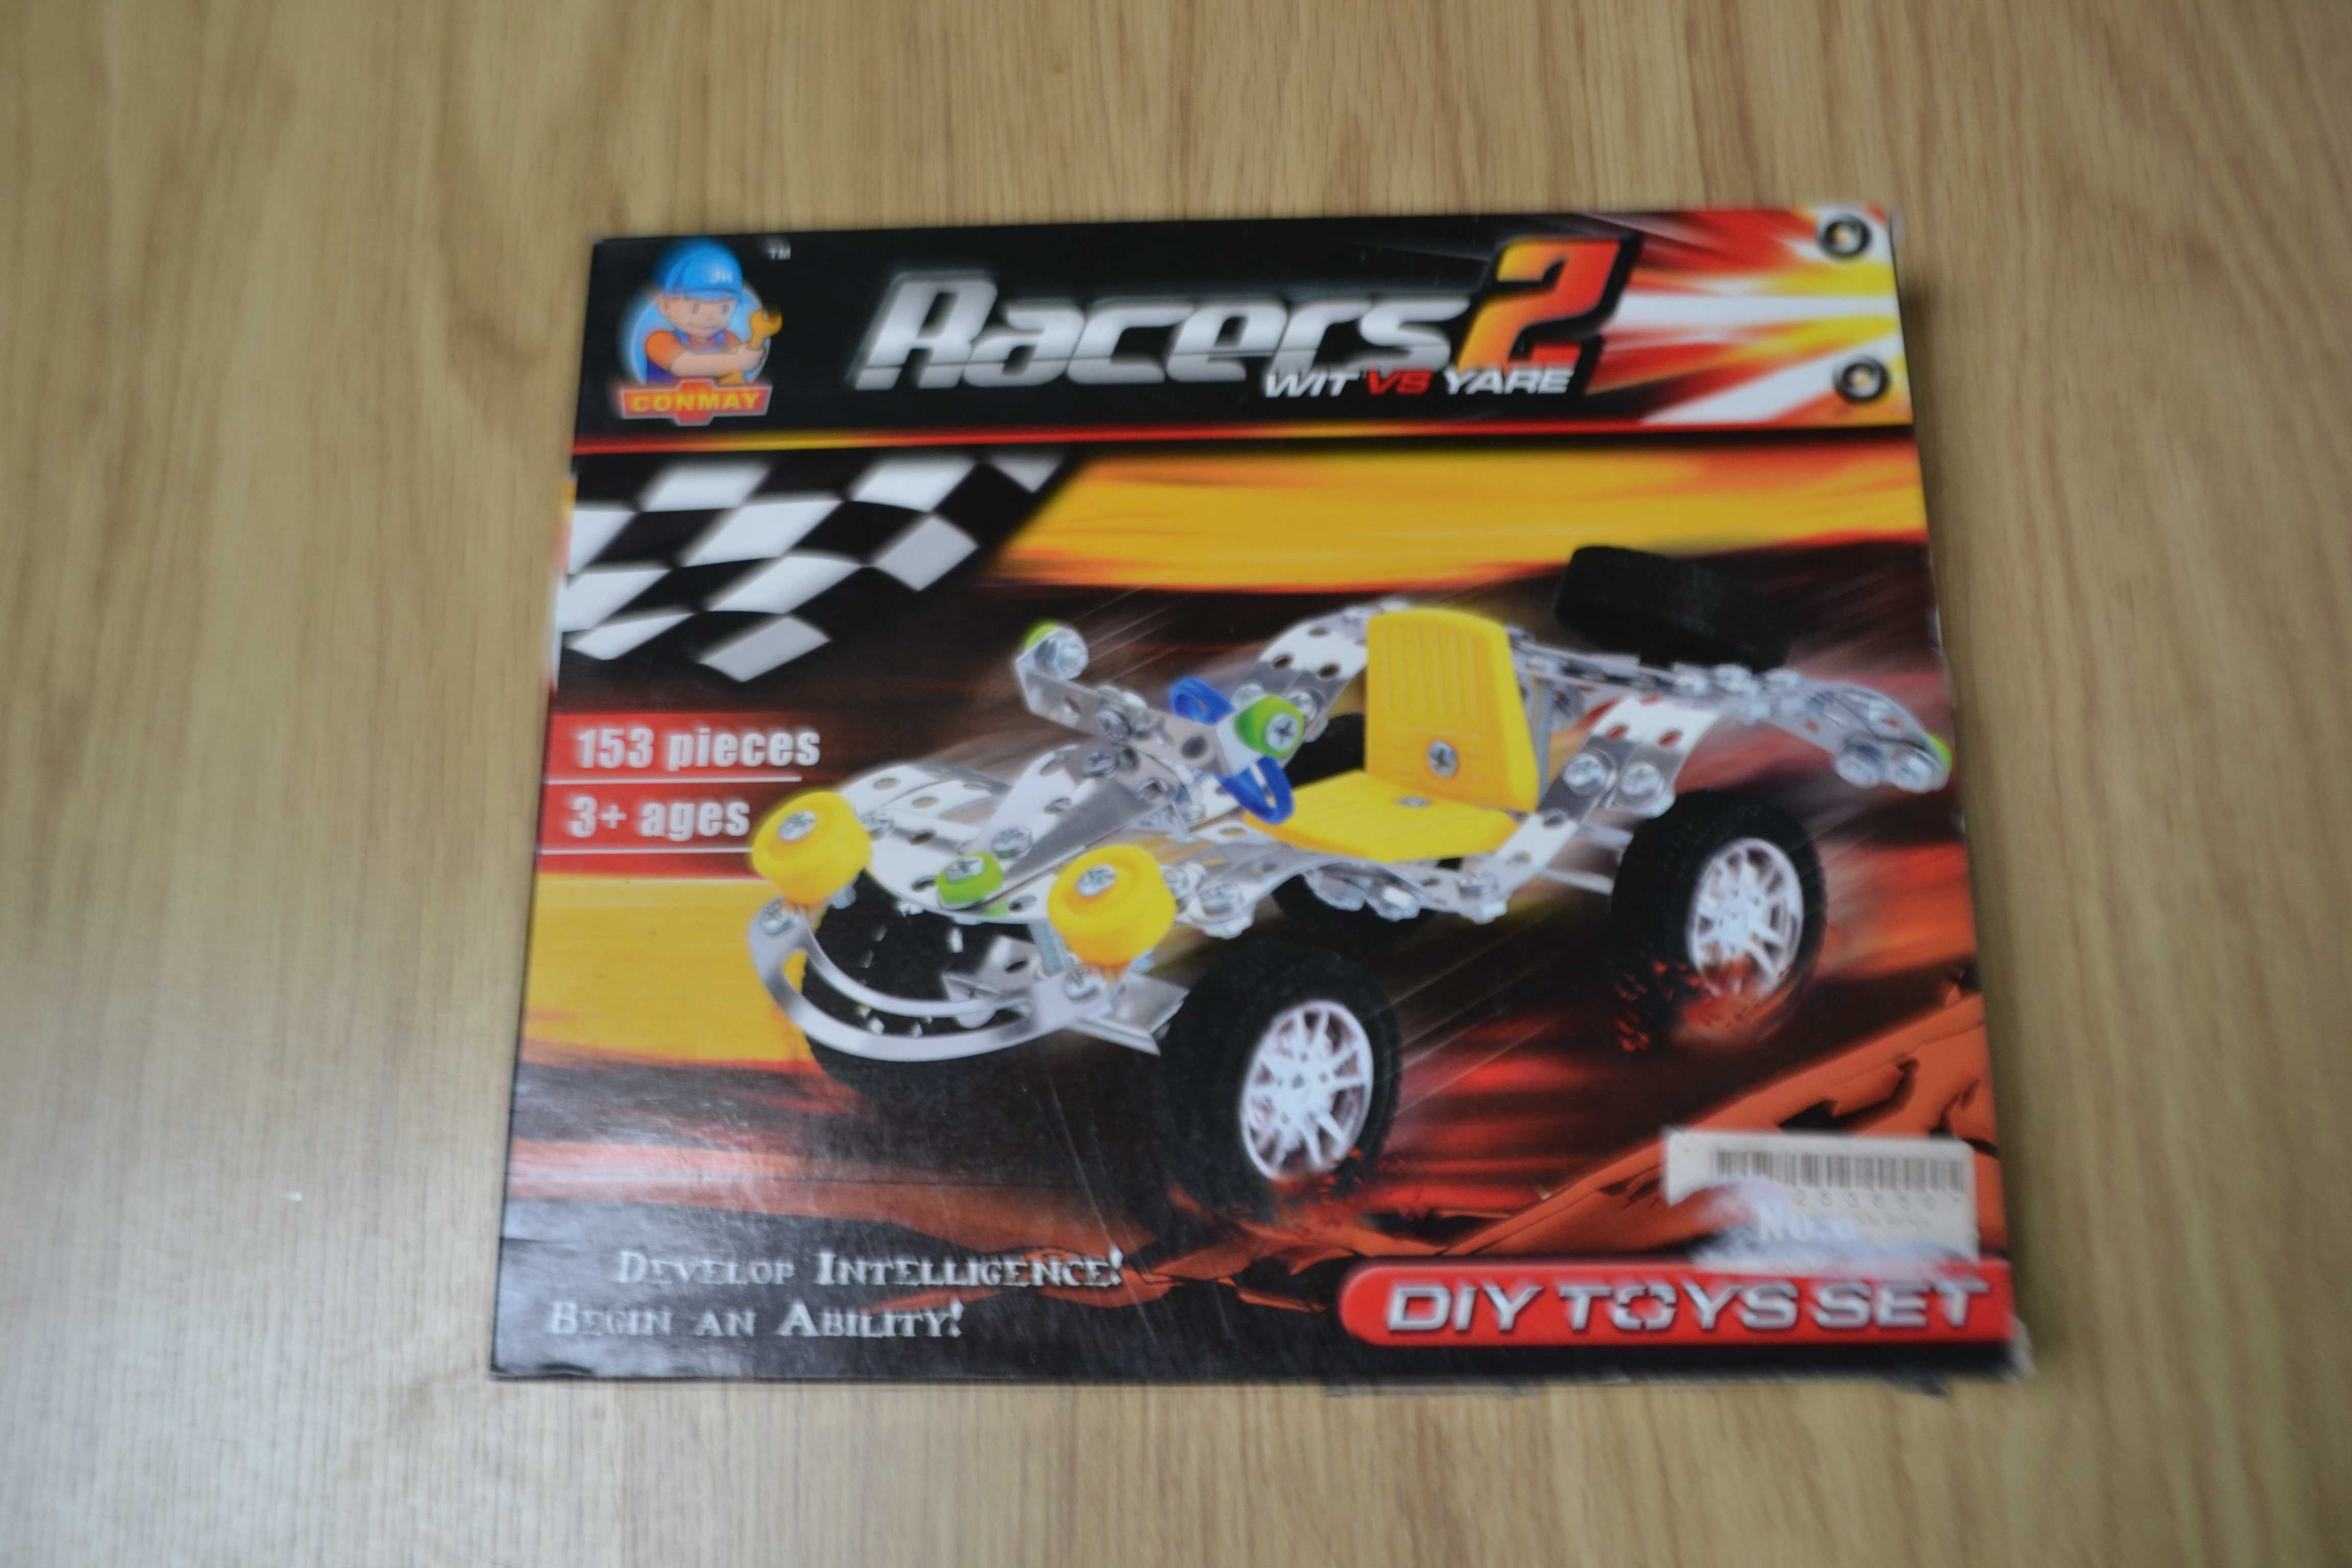 Racers 2 Wit vs Yare - da Conmay - DIY Toy Set